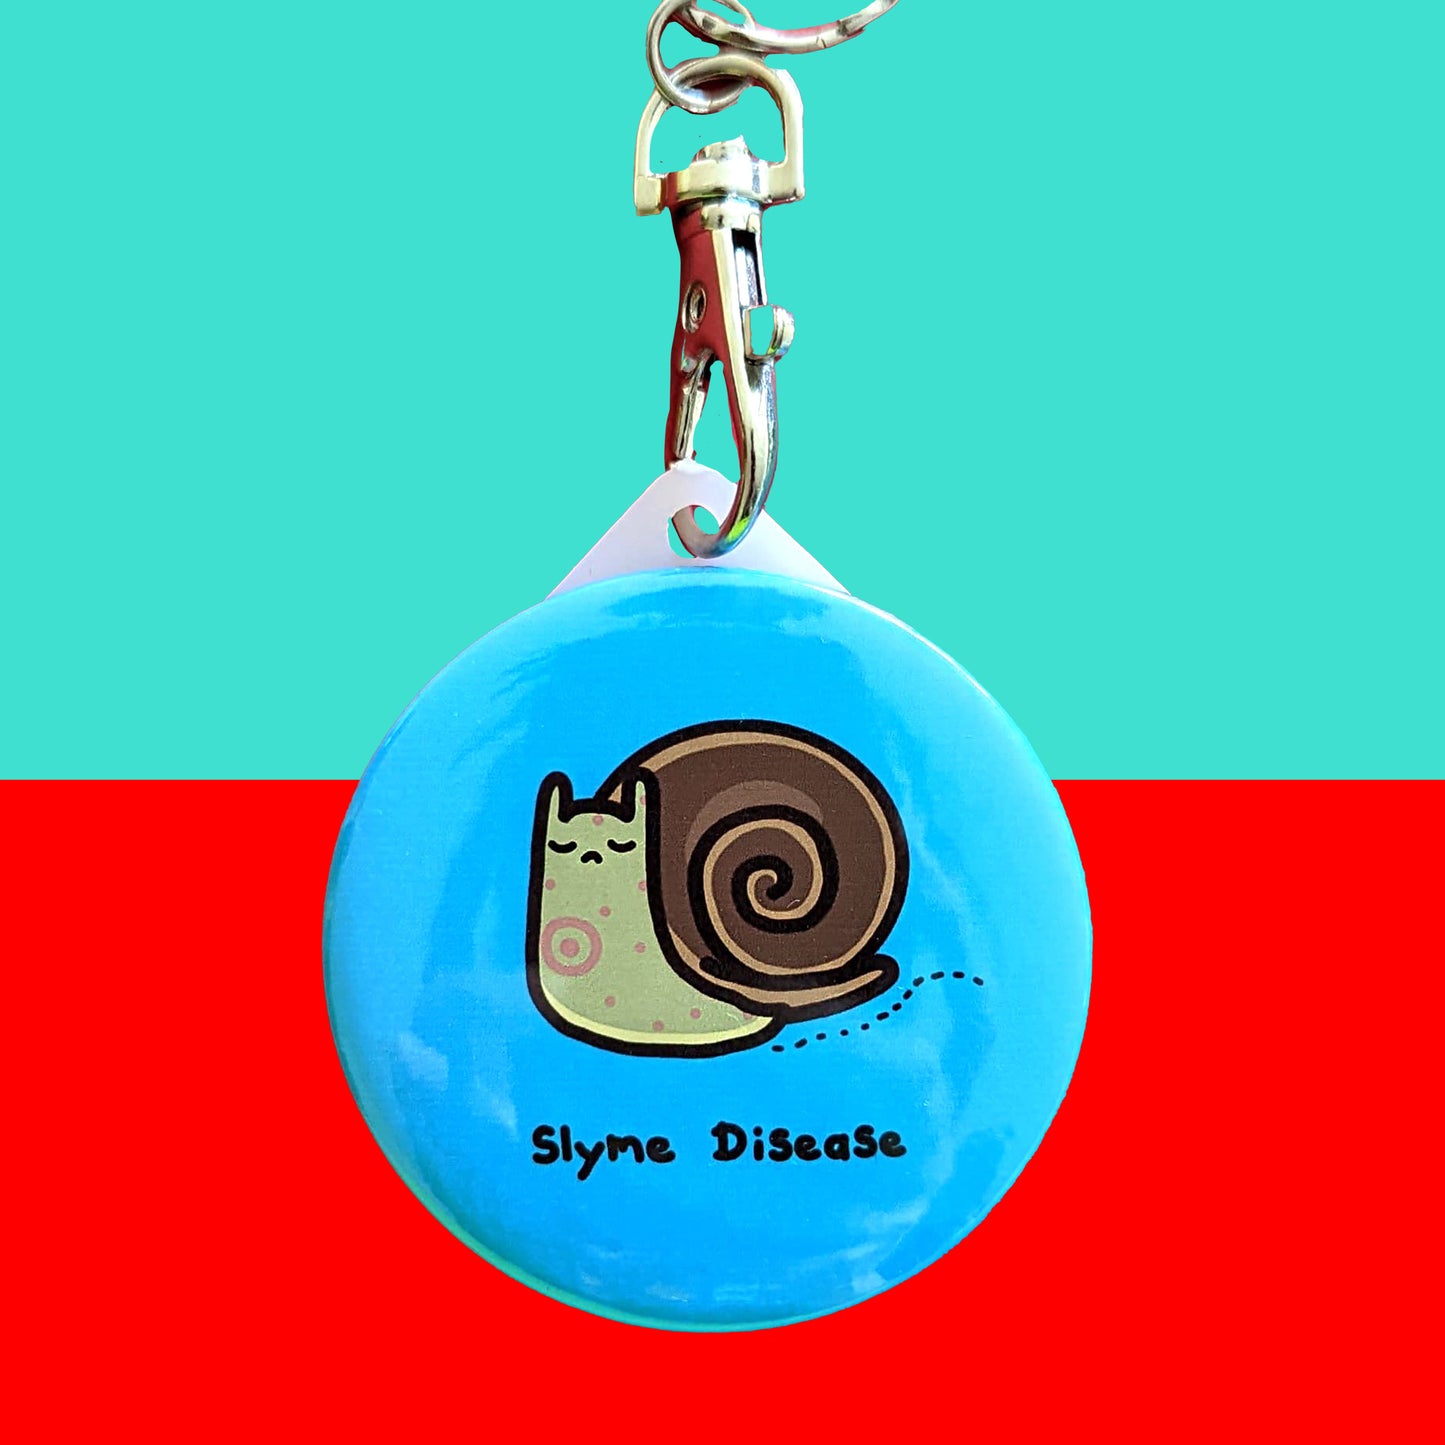 Slyme Disease Snail Keyring - Lyme Disease on a red and blue background. The pastel blue plastic circular keychain with silver lobster clip features a sad brown snail with red spots, underneath is black text reading 'slyme disease'. The hand drawn design is raising awareness for lyme disease.